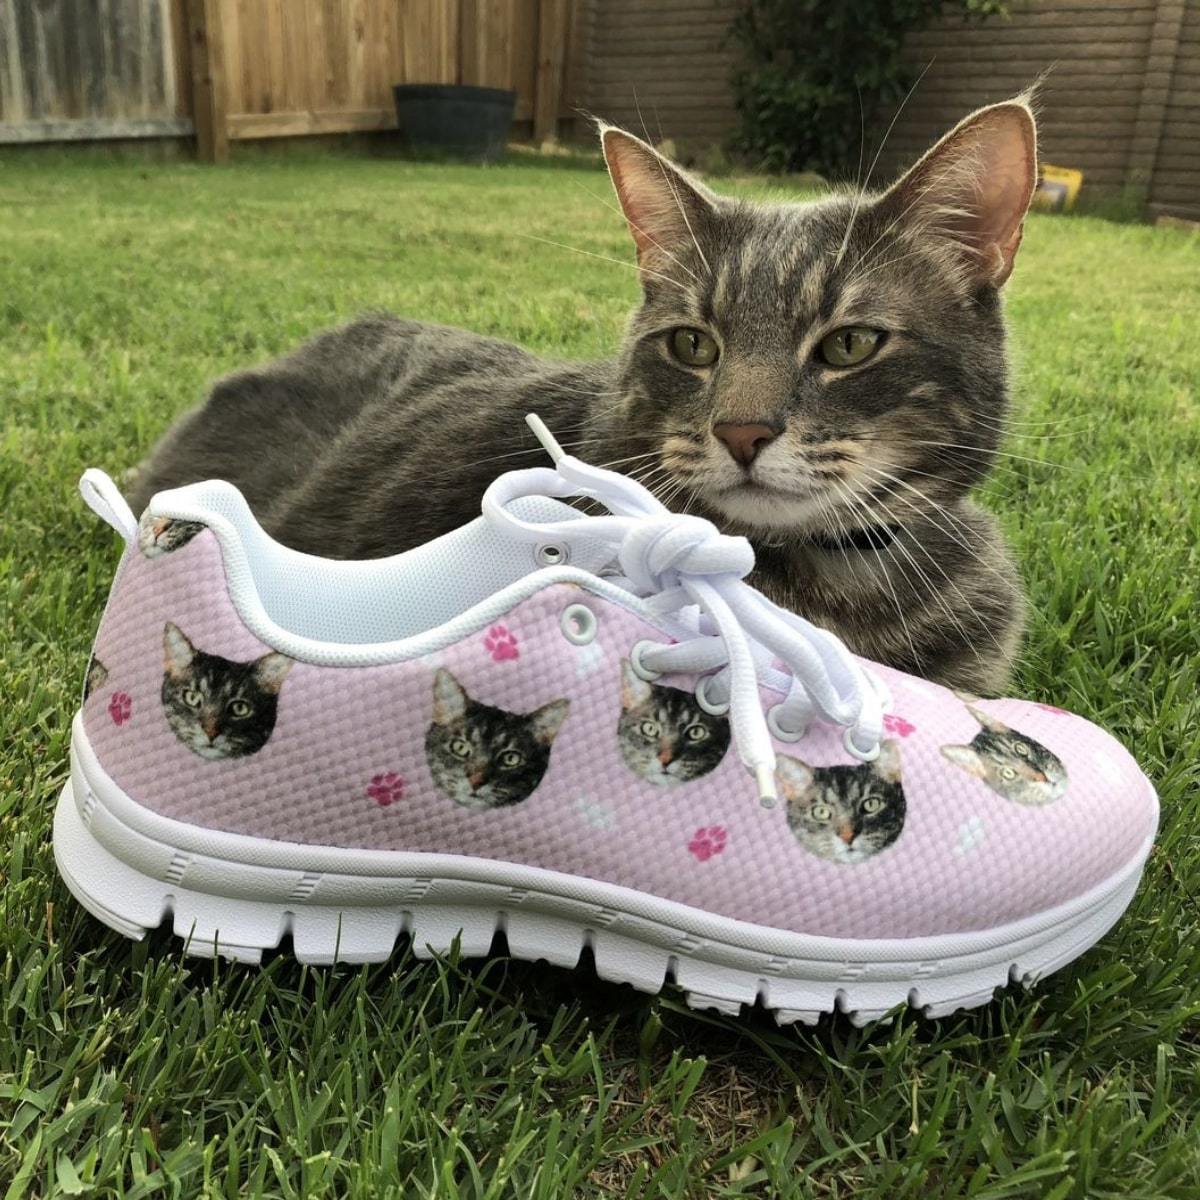 Hejse Rund ned Passiv 1 Personalized Furkid Cat Sneakers For Cat Lovers - CatsForLife